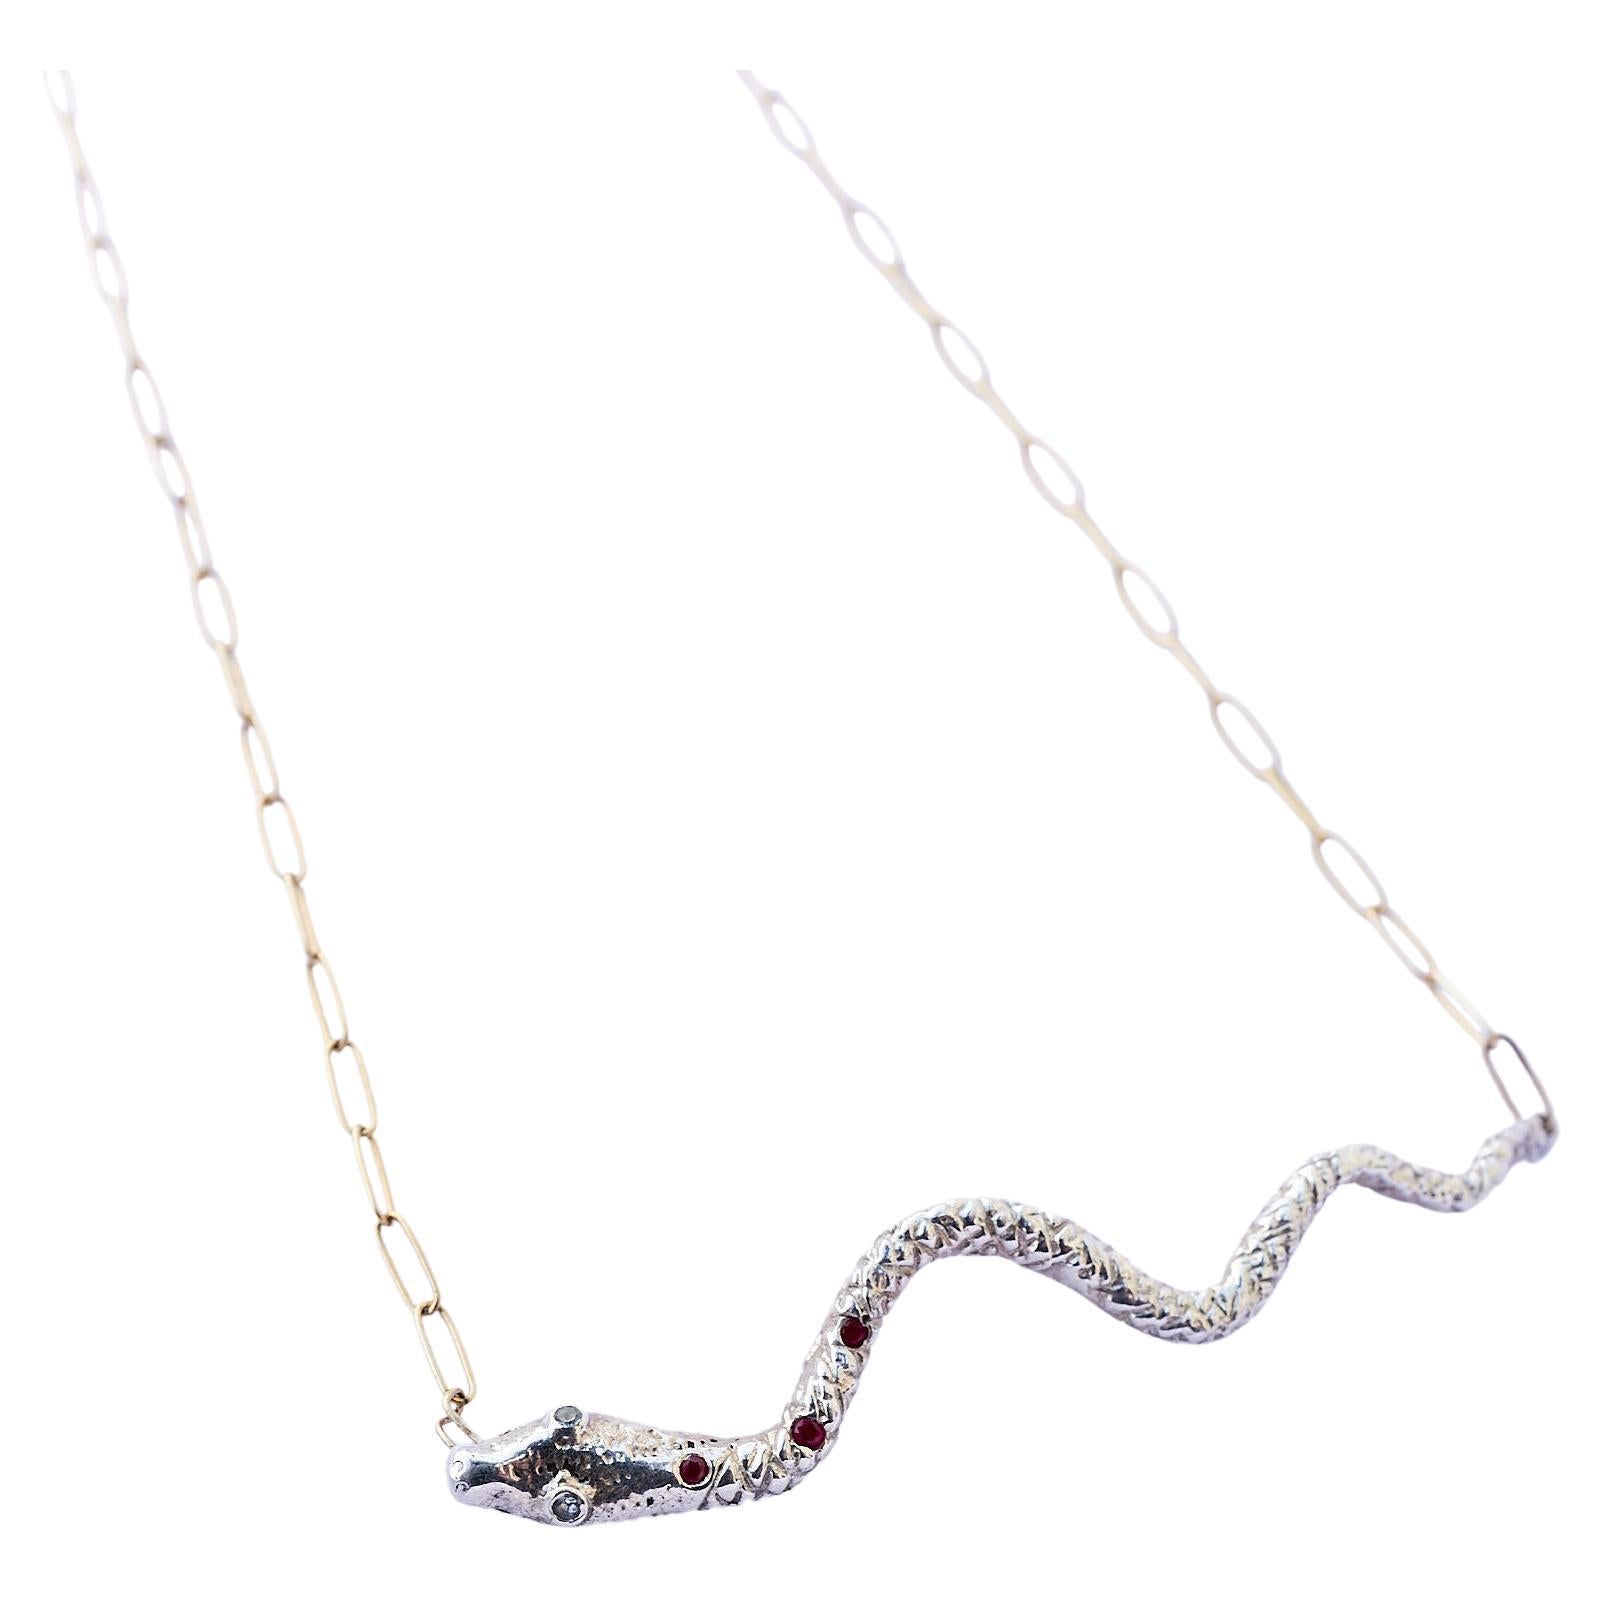 Snake Necklace Silver Ruby Iolite Gold Filled Chain J Dauphin

J DAUPHIN short necklace 